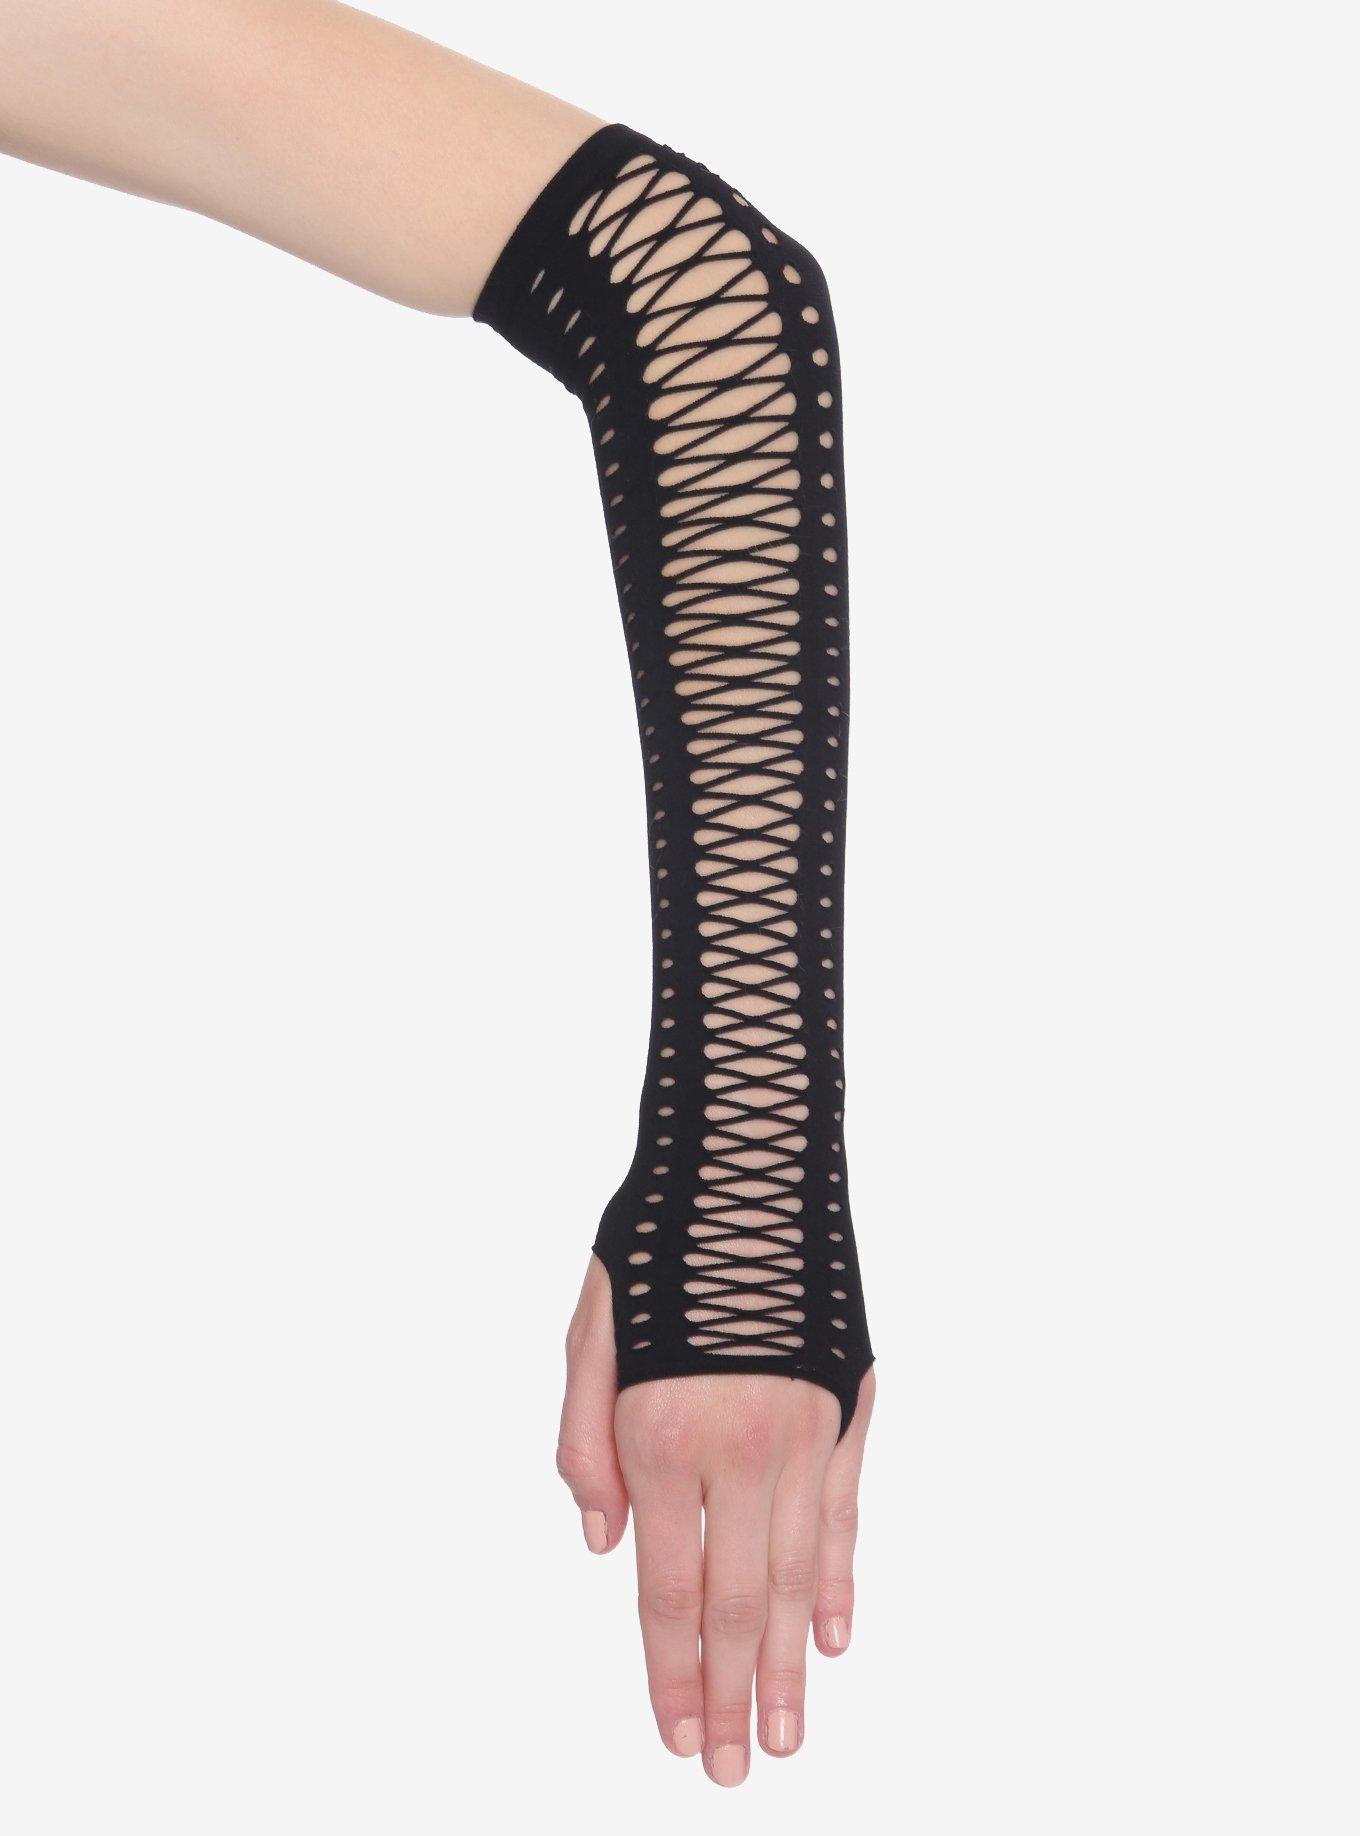 Black Lace-Up Arm Warmers, , alternate